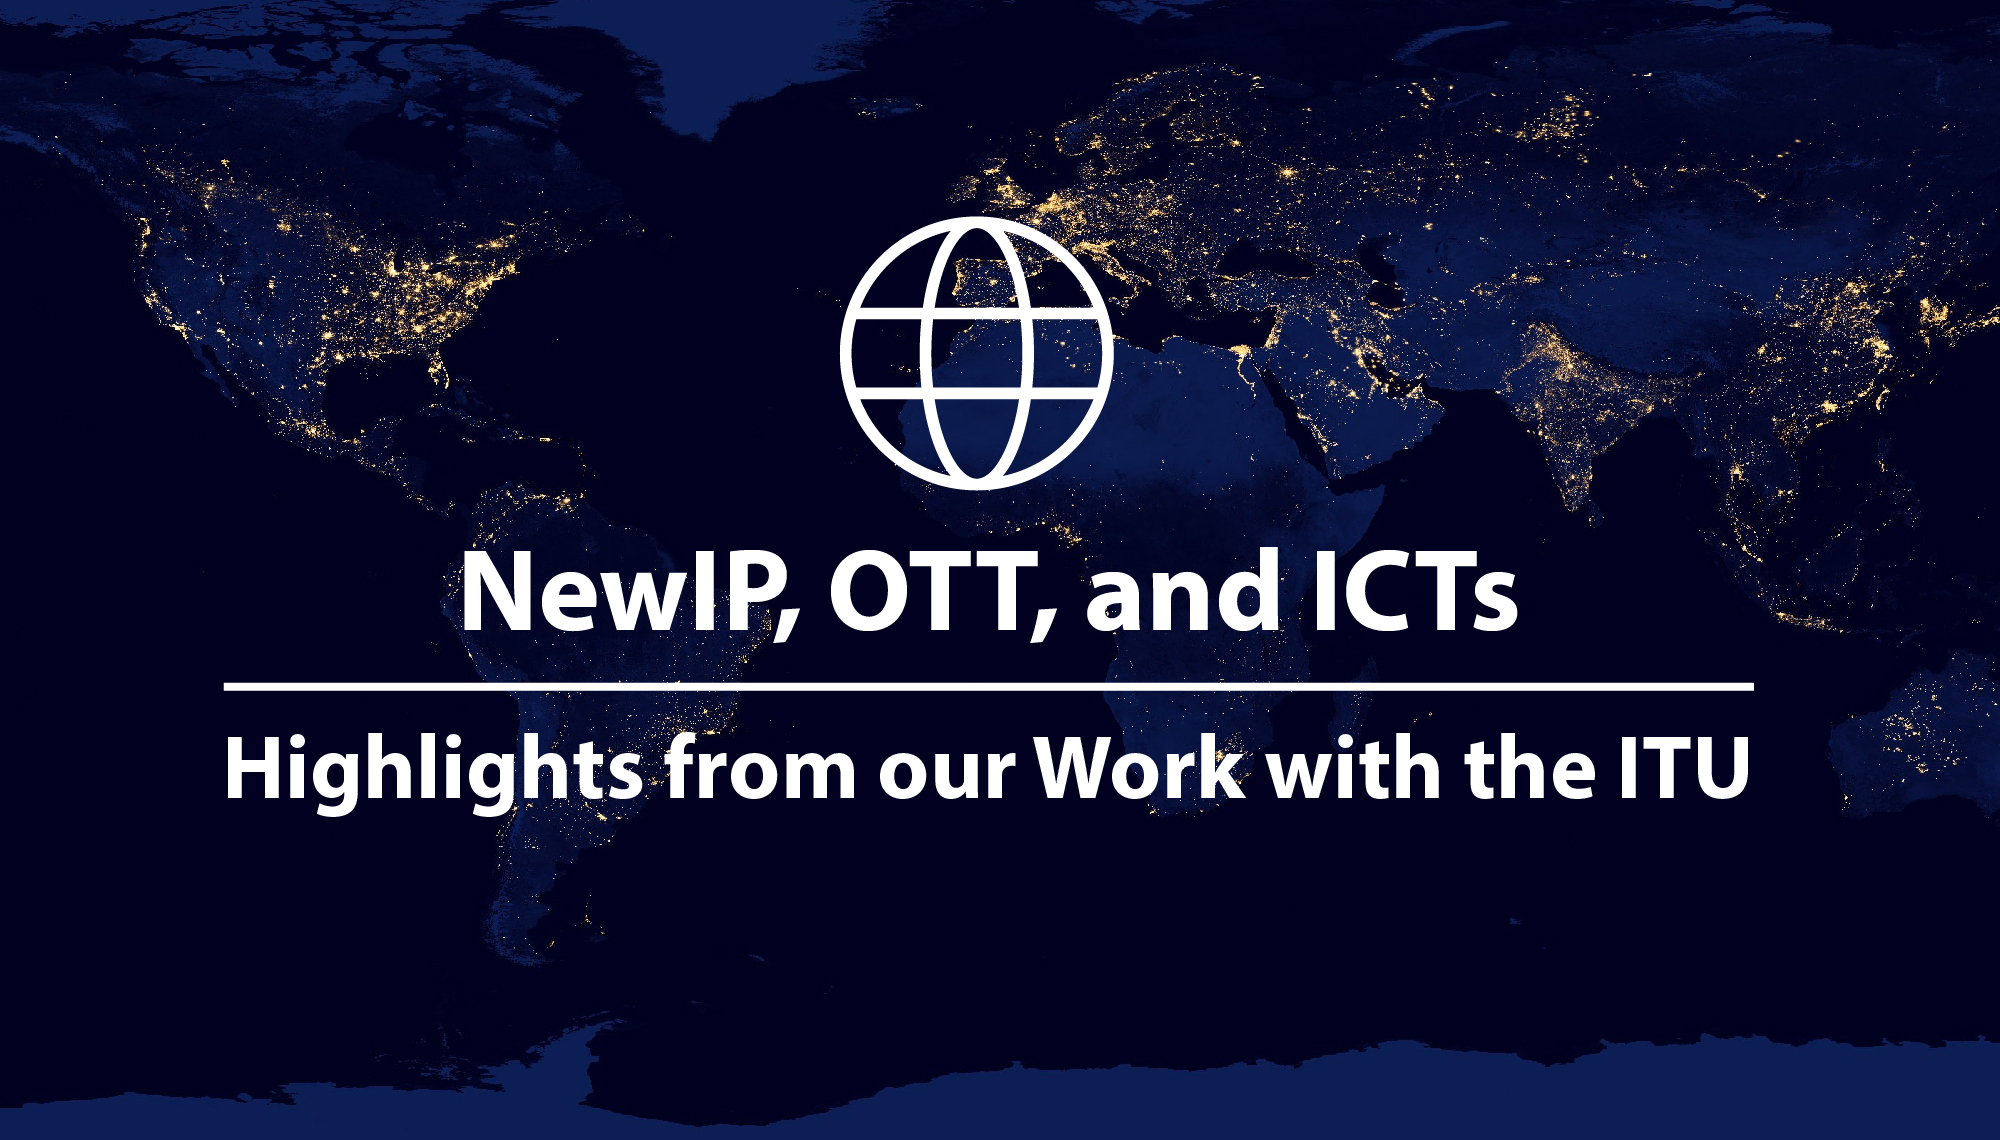 NewIP, OTT, and ICTs: Highlights from our Work with the ITU